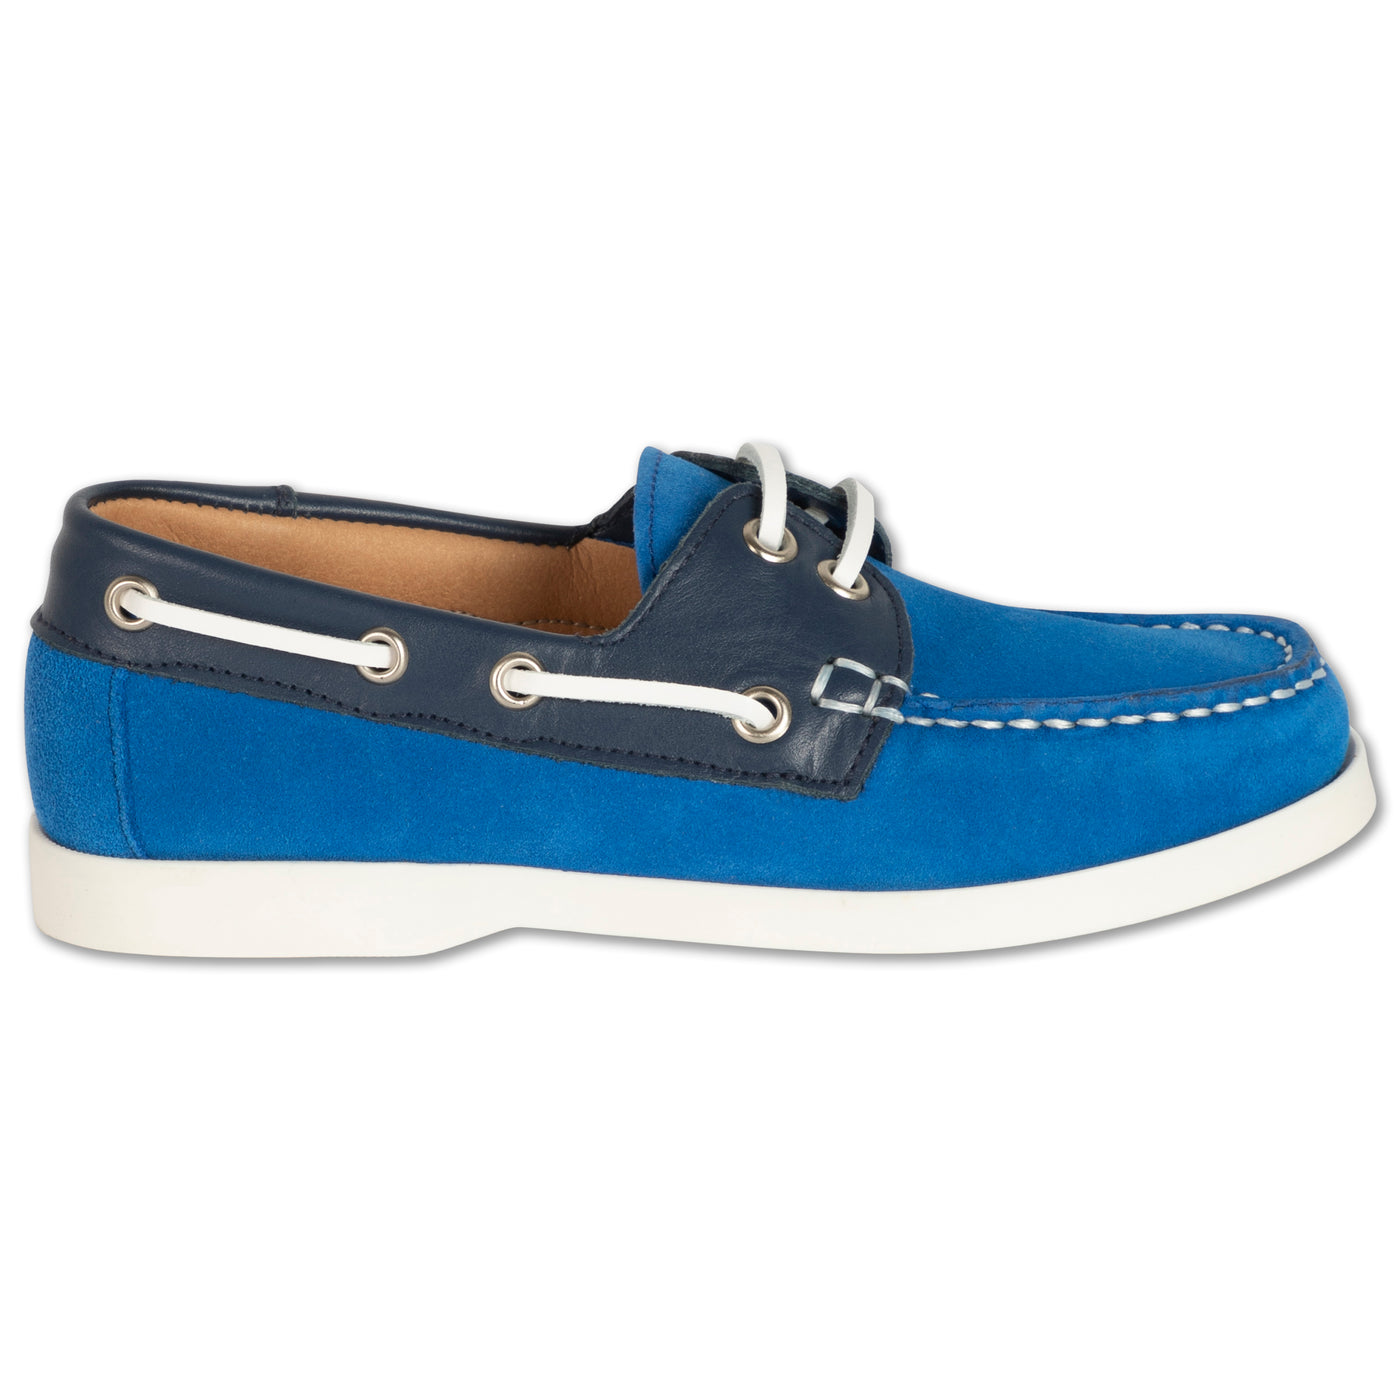 boat shoes - bright night blue color block